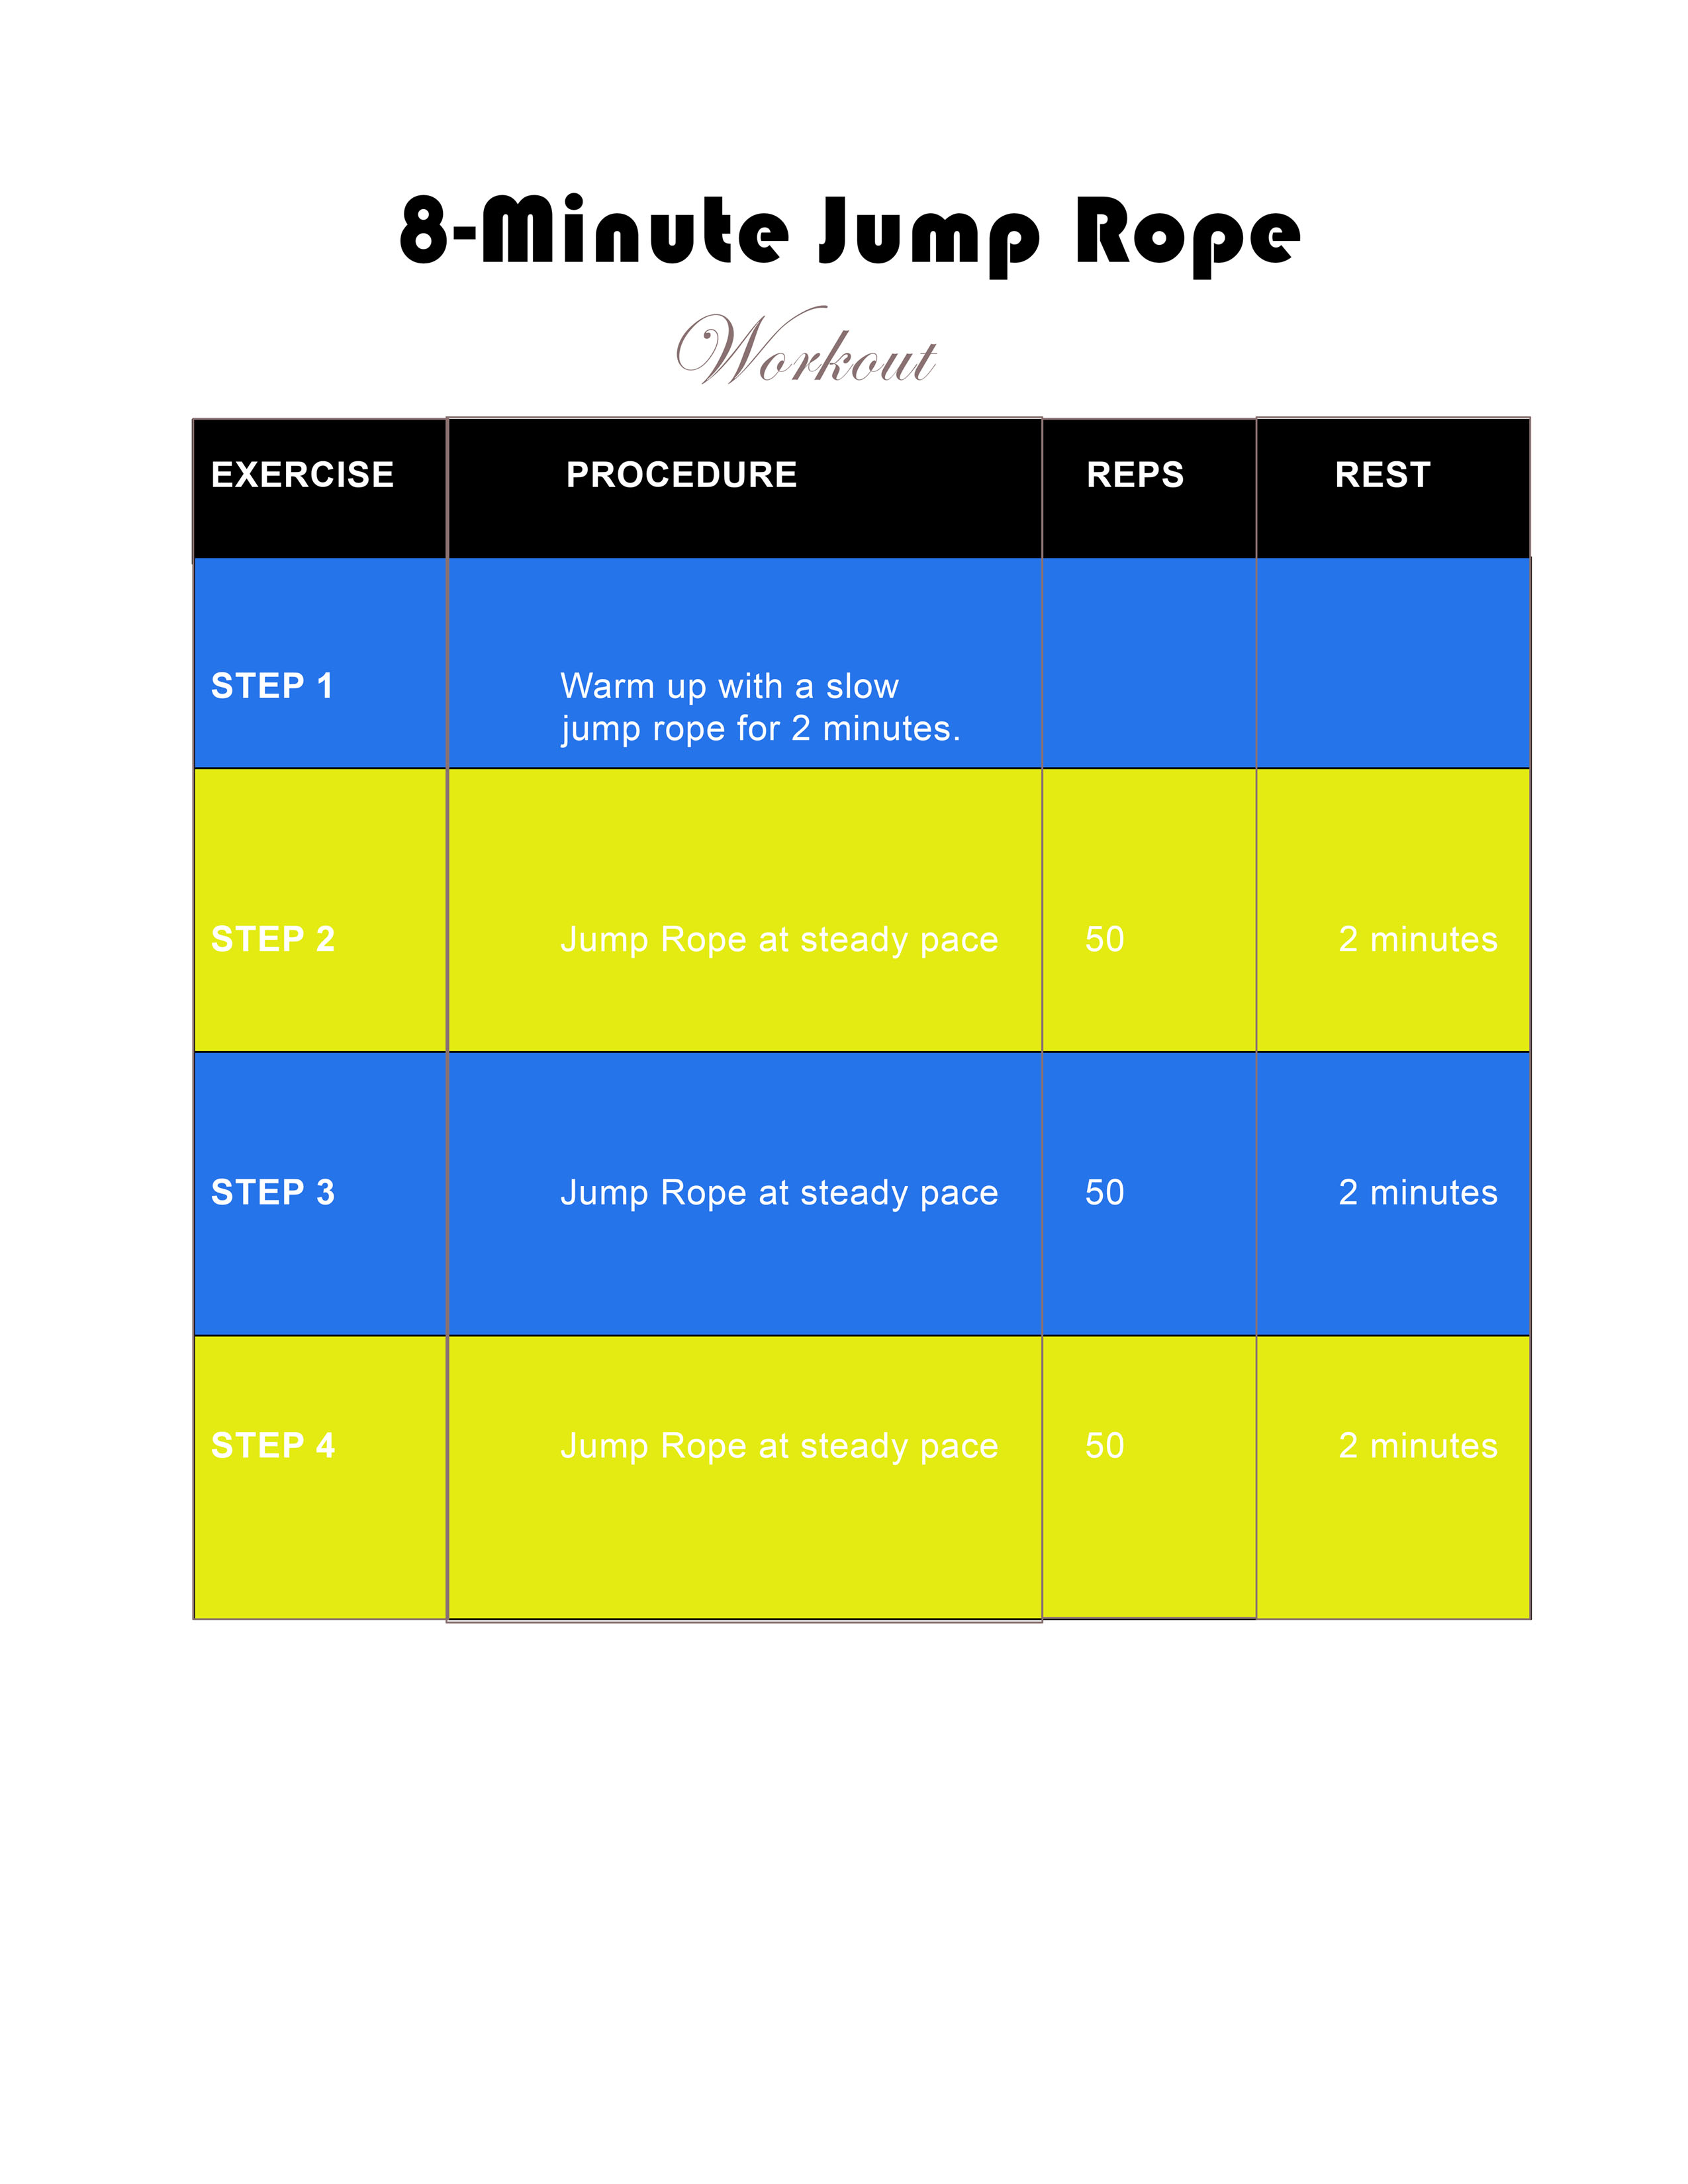 8 minute jump rope workout you can download and print.